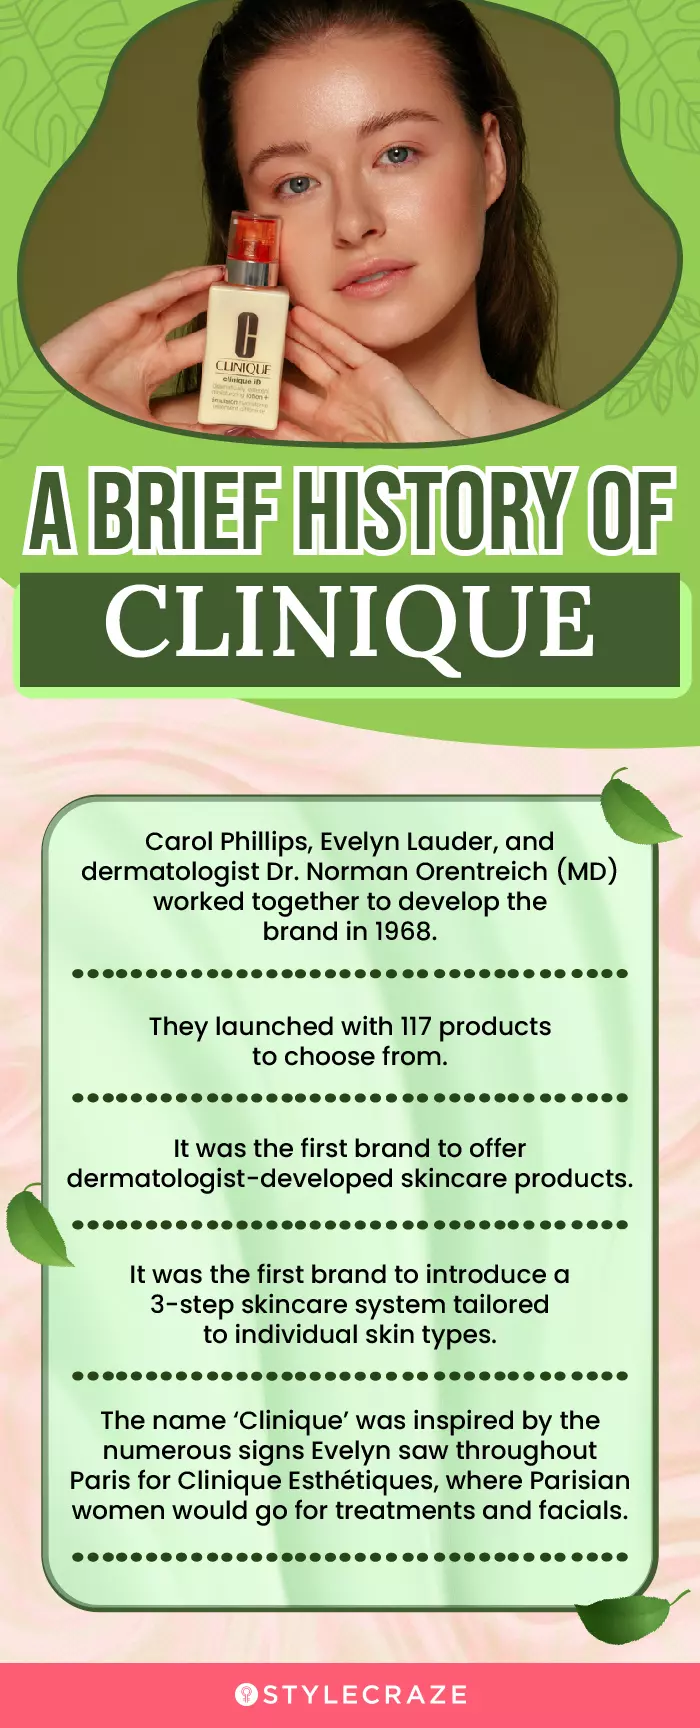 A Brief History Of Clinique (infographic)